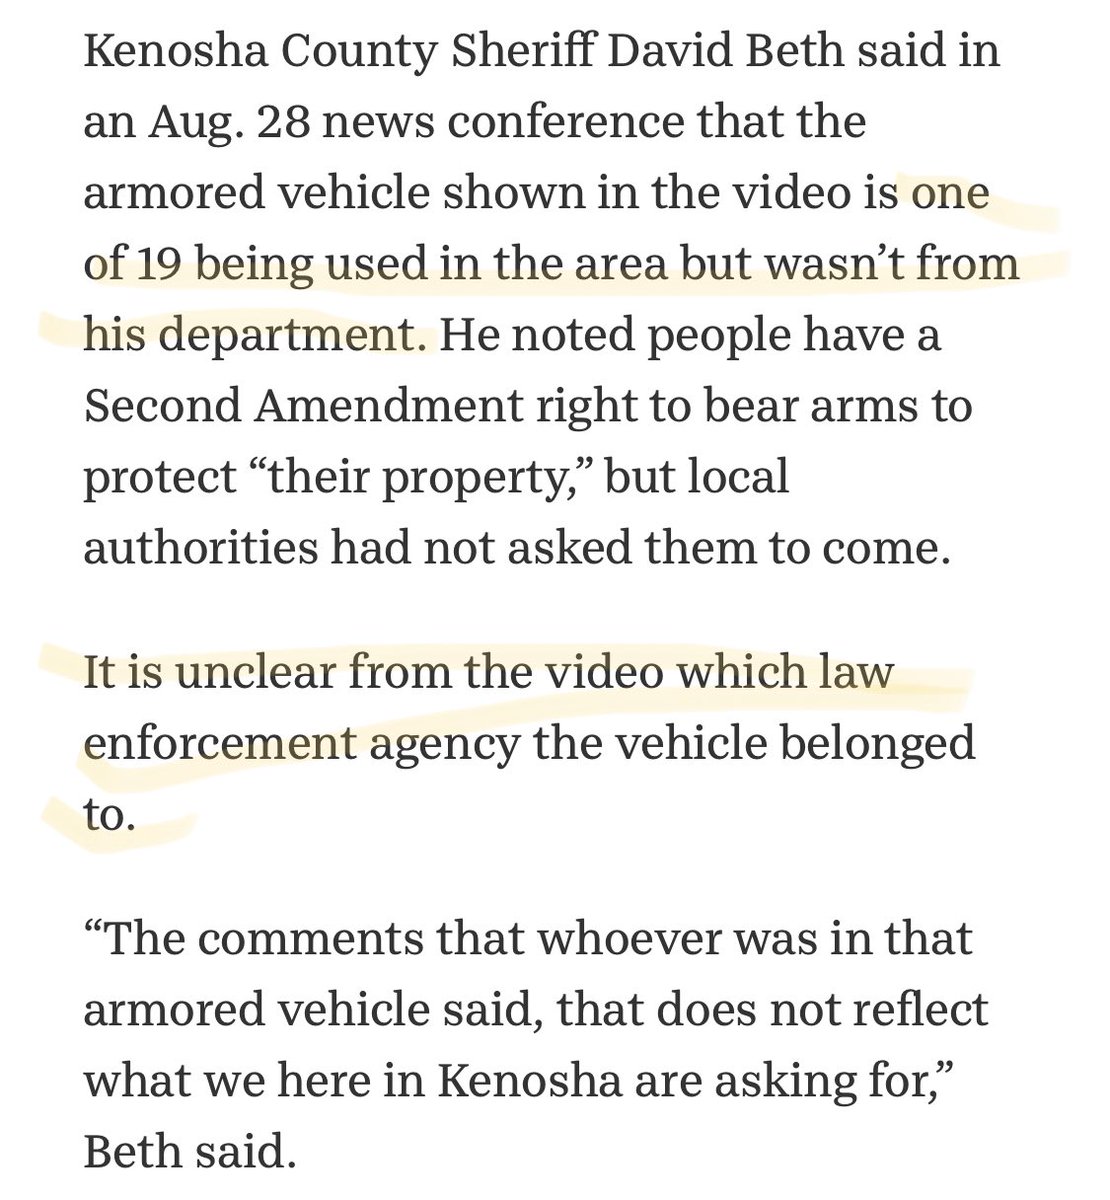 In this USA Today article published just 4 days after the shooting in Kenosha, the sheriff says the armored tank that tossed water to Rittenhouse wasn’t from his department but didn’t identify exactly who it was. So tanks are just rolling thru a community assisting the far right? 